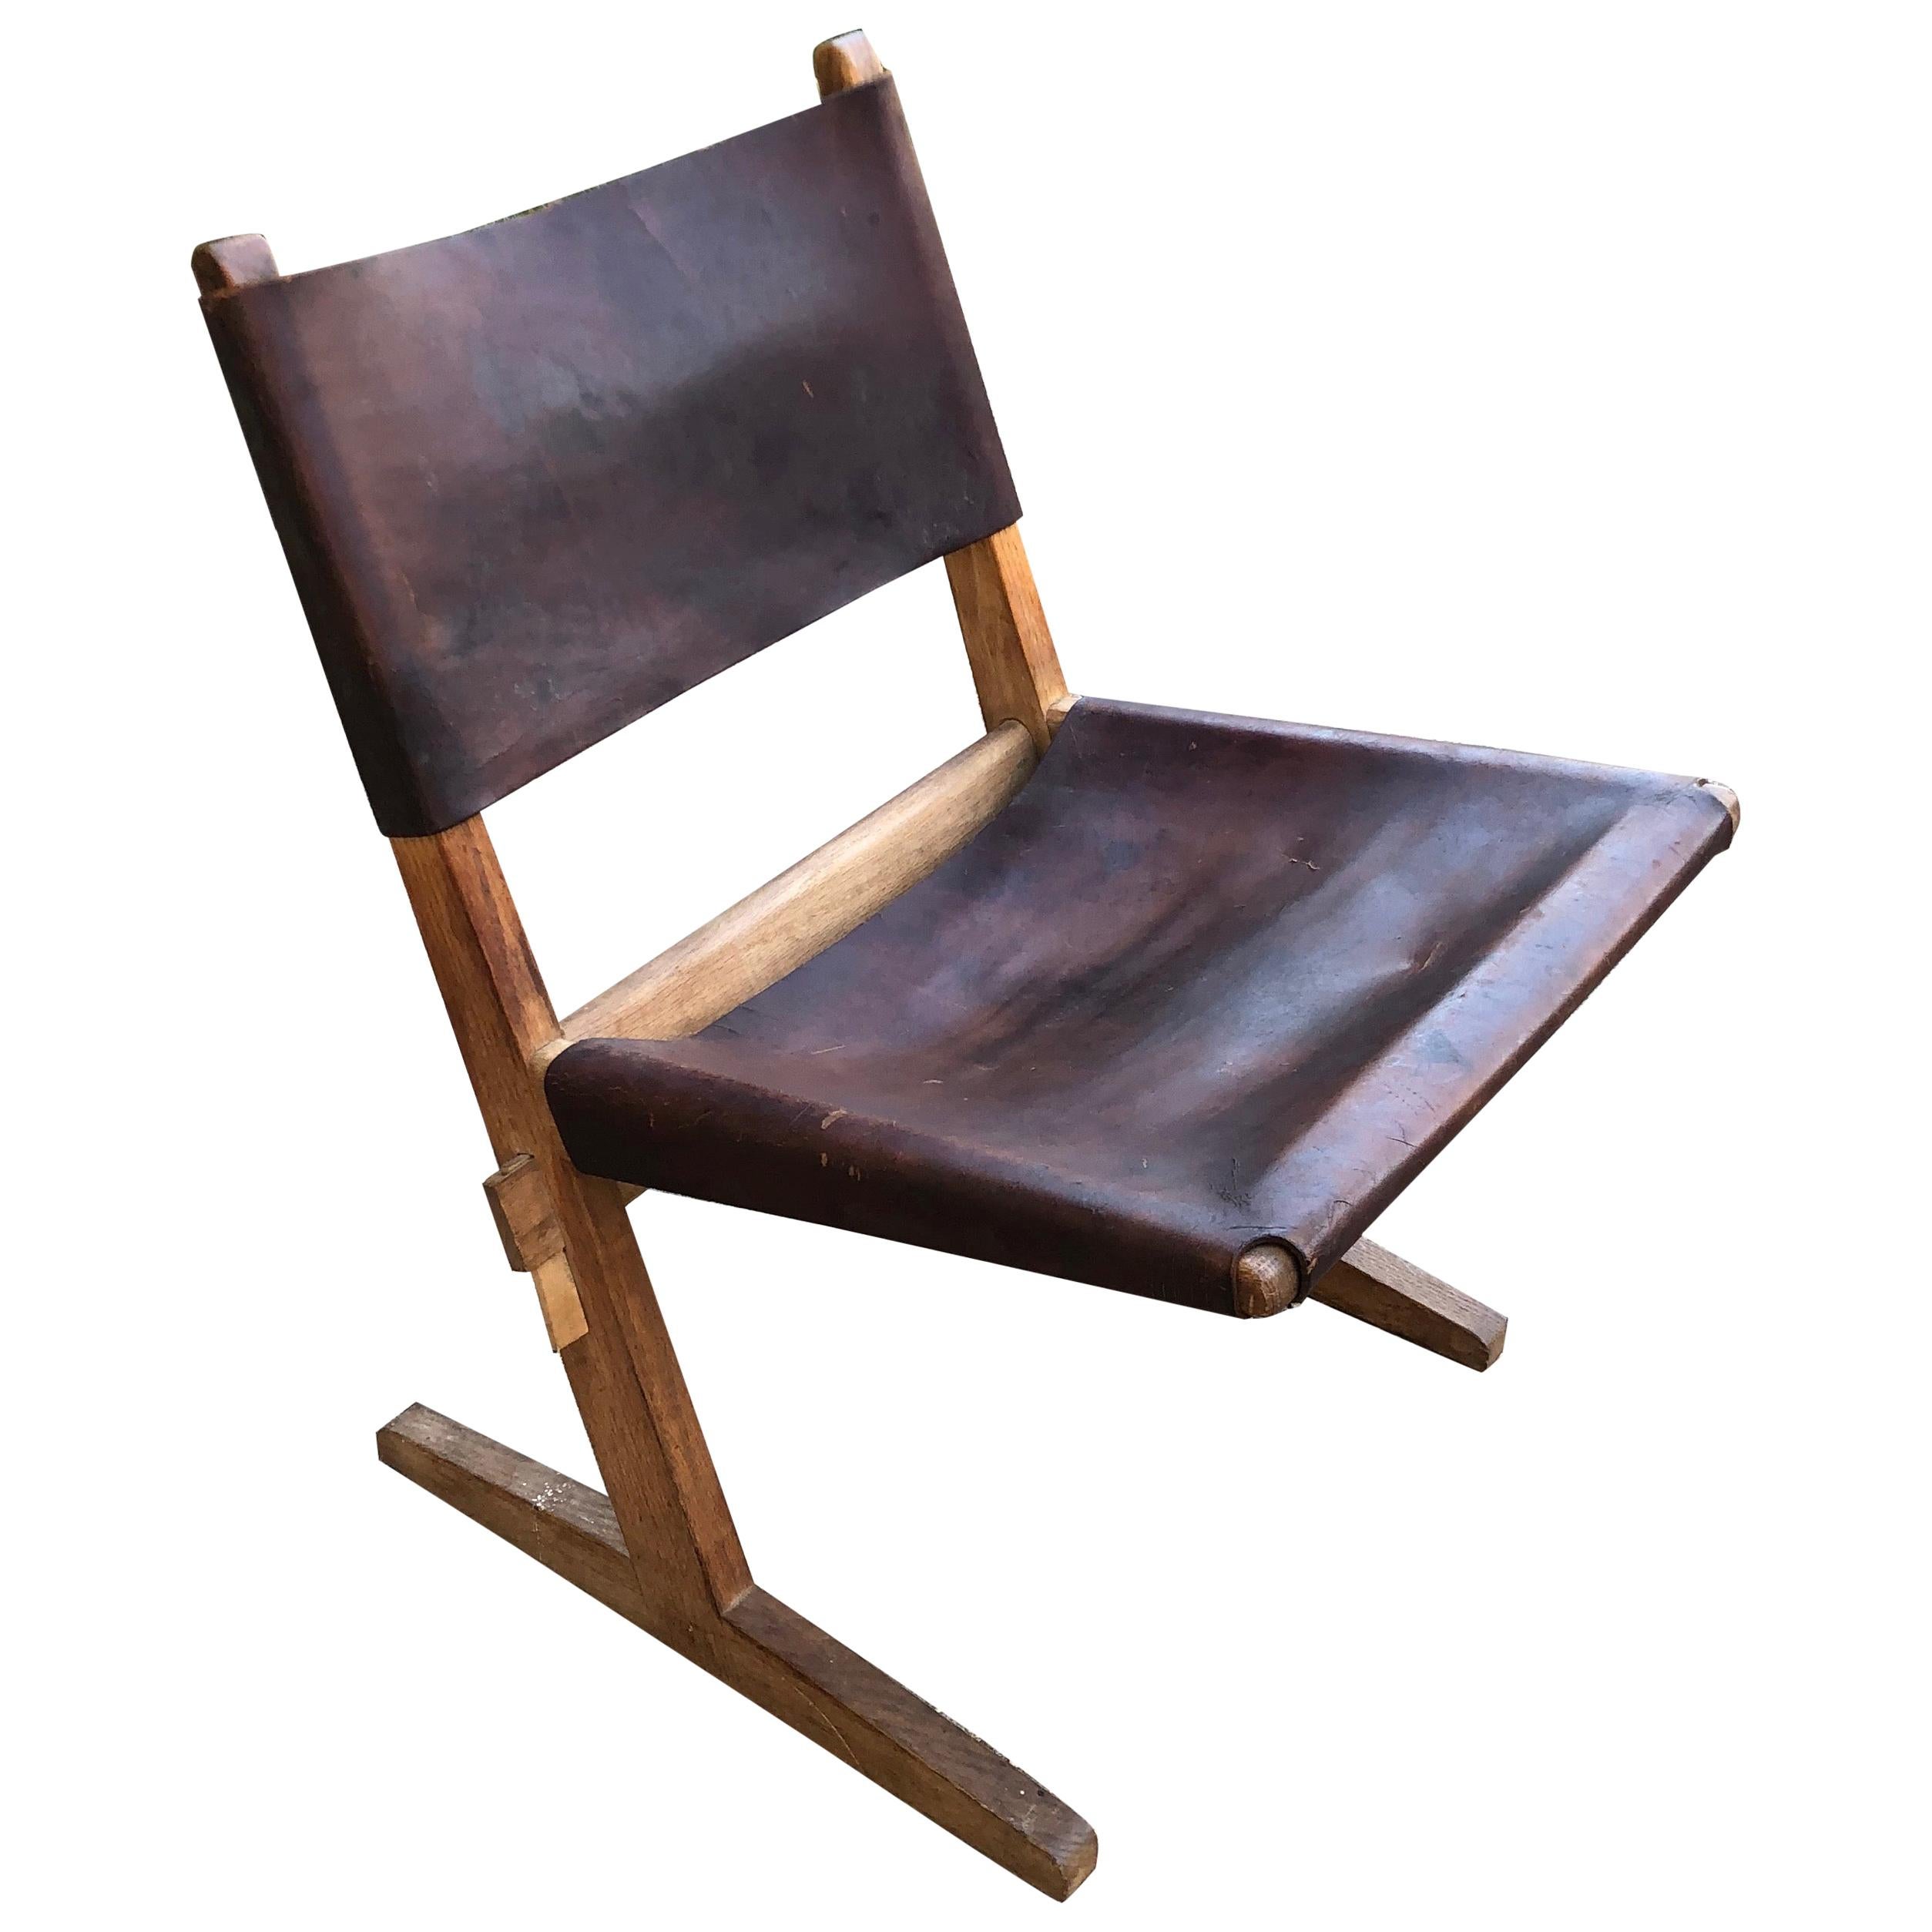 Stylish Wood and Leather Cantilevered Chair